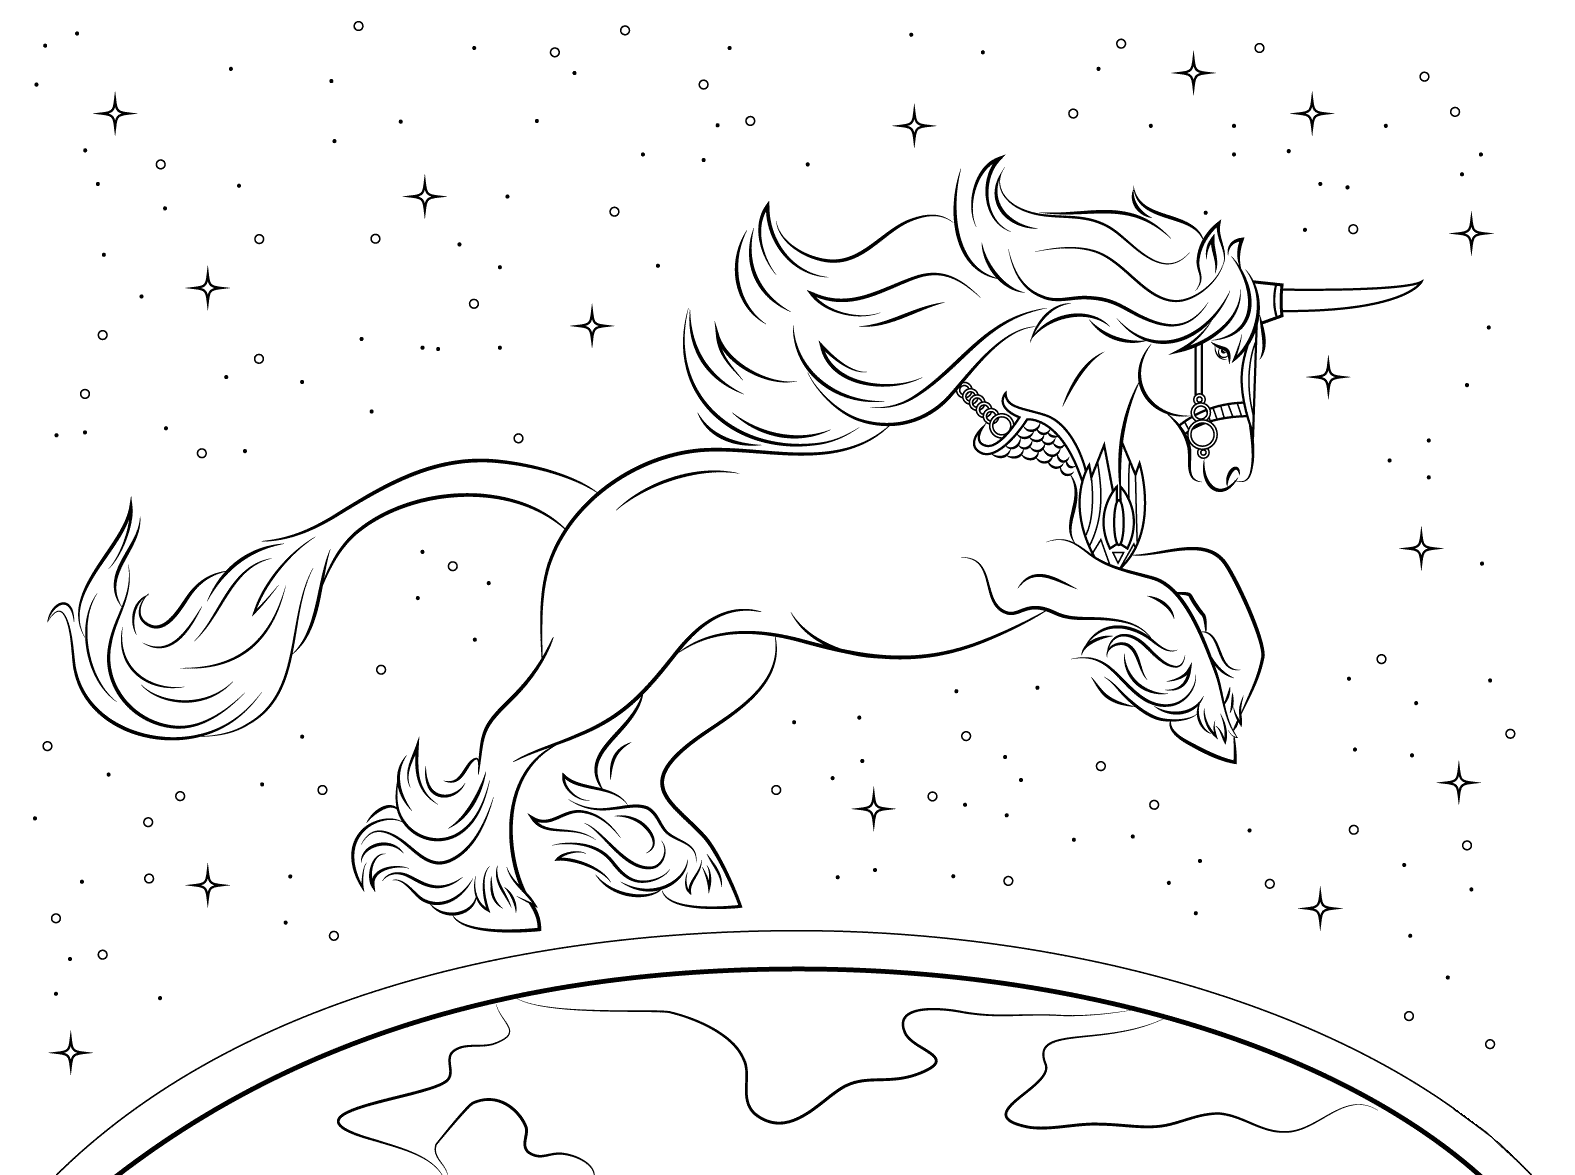 Unicorn Coloring Pages - Free Printable Coloring Pages for Kids